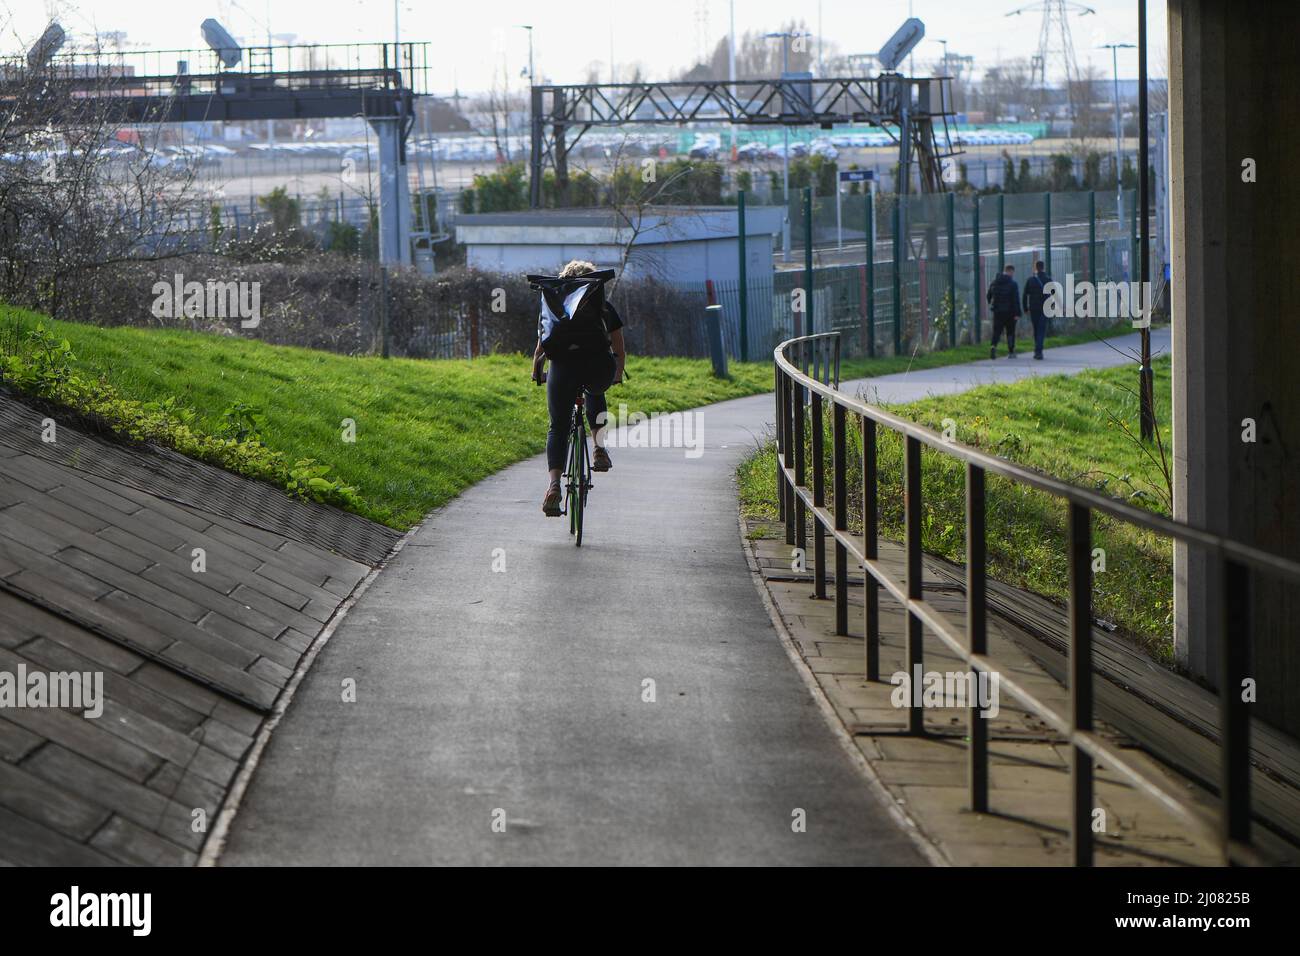 A single cyclist with a backpack using a underpass cycle route connecting Southampton City centre to the wider area outside of the city. Stock Photo